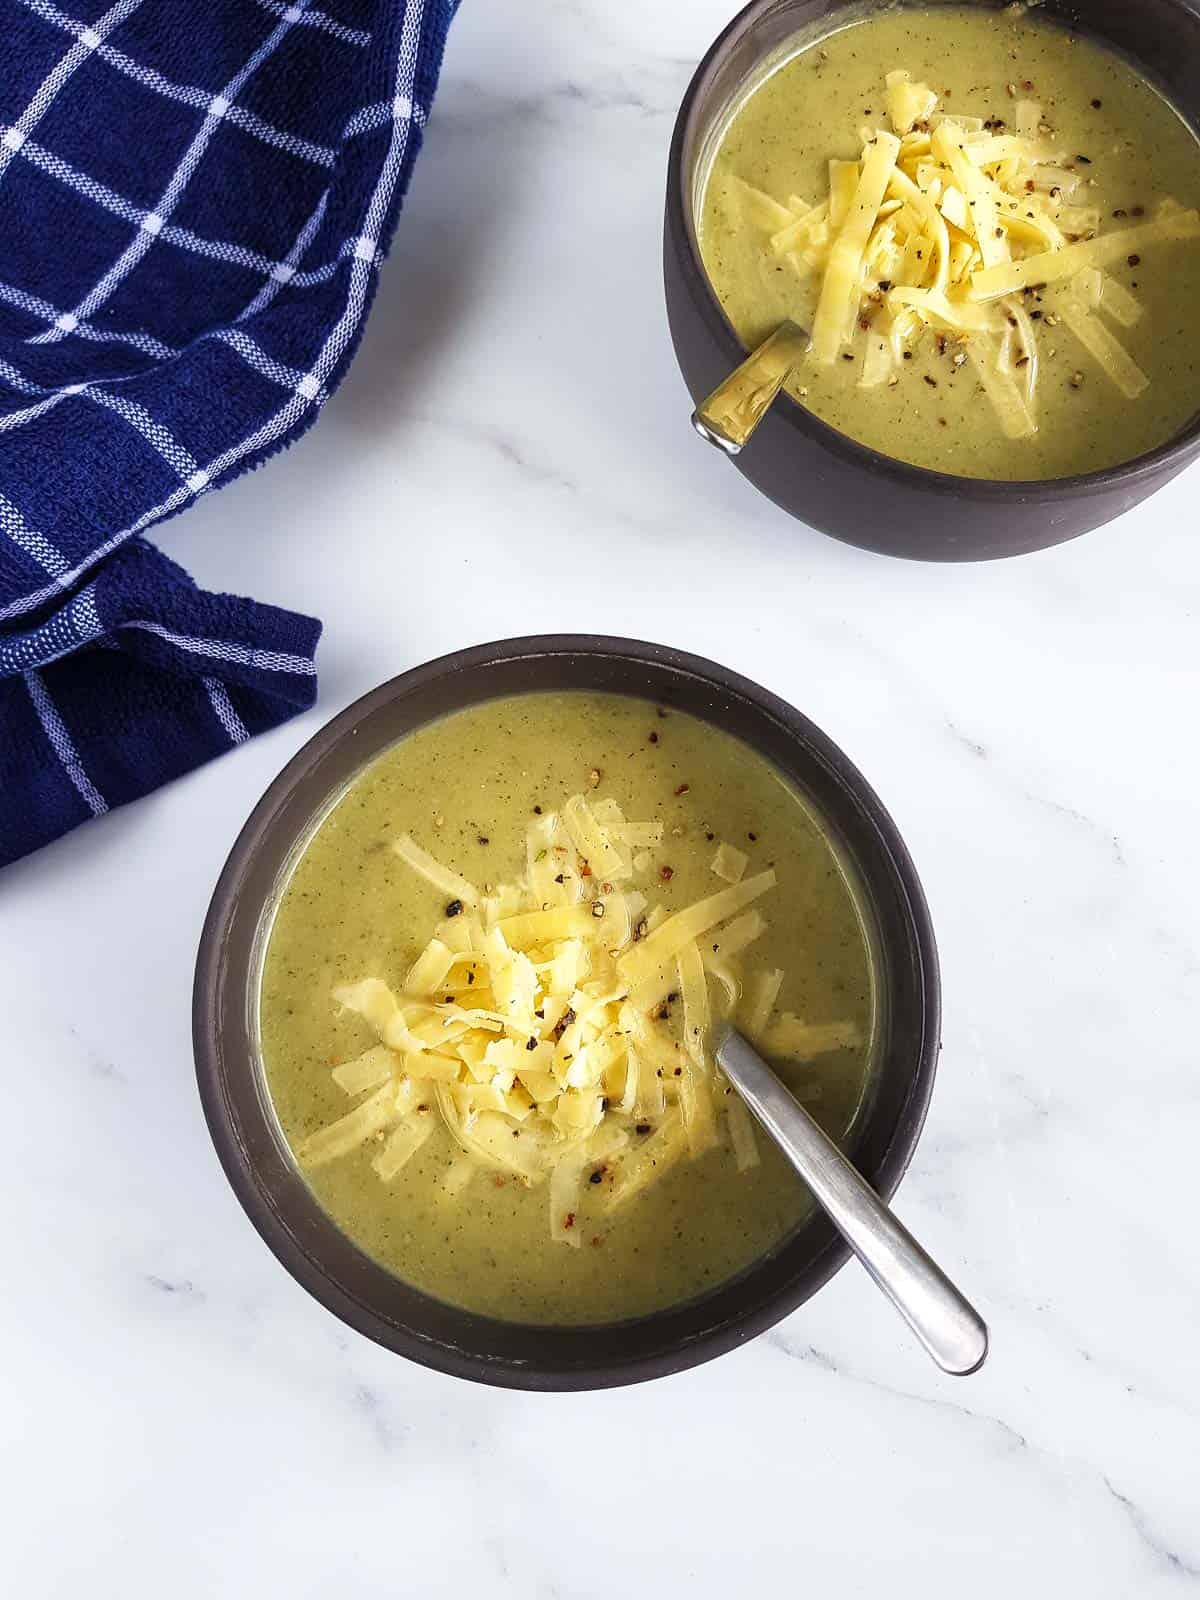 Broccoli and cauliflower soup in bowls with shredded cheese on top.